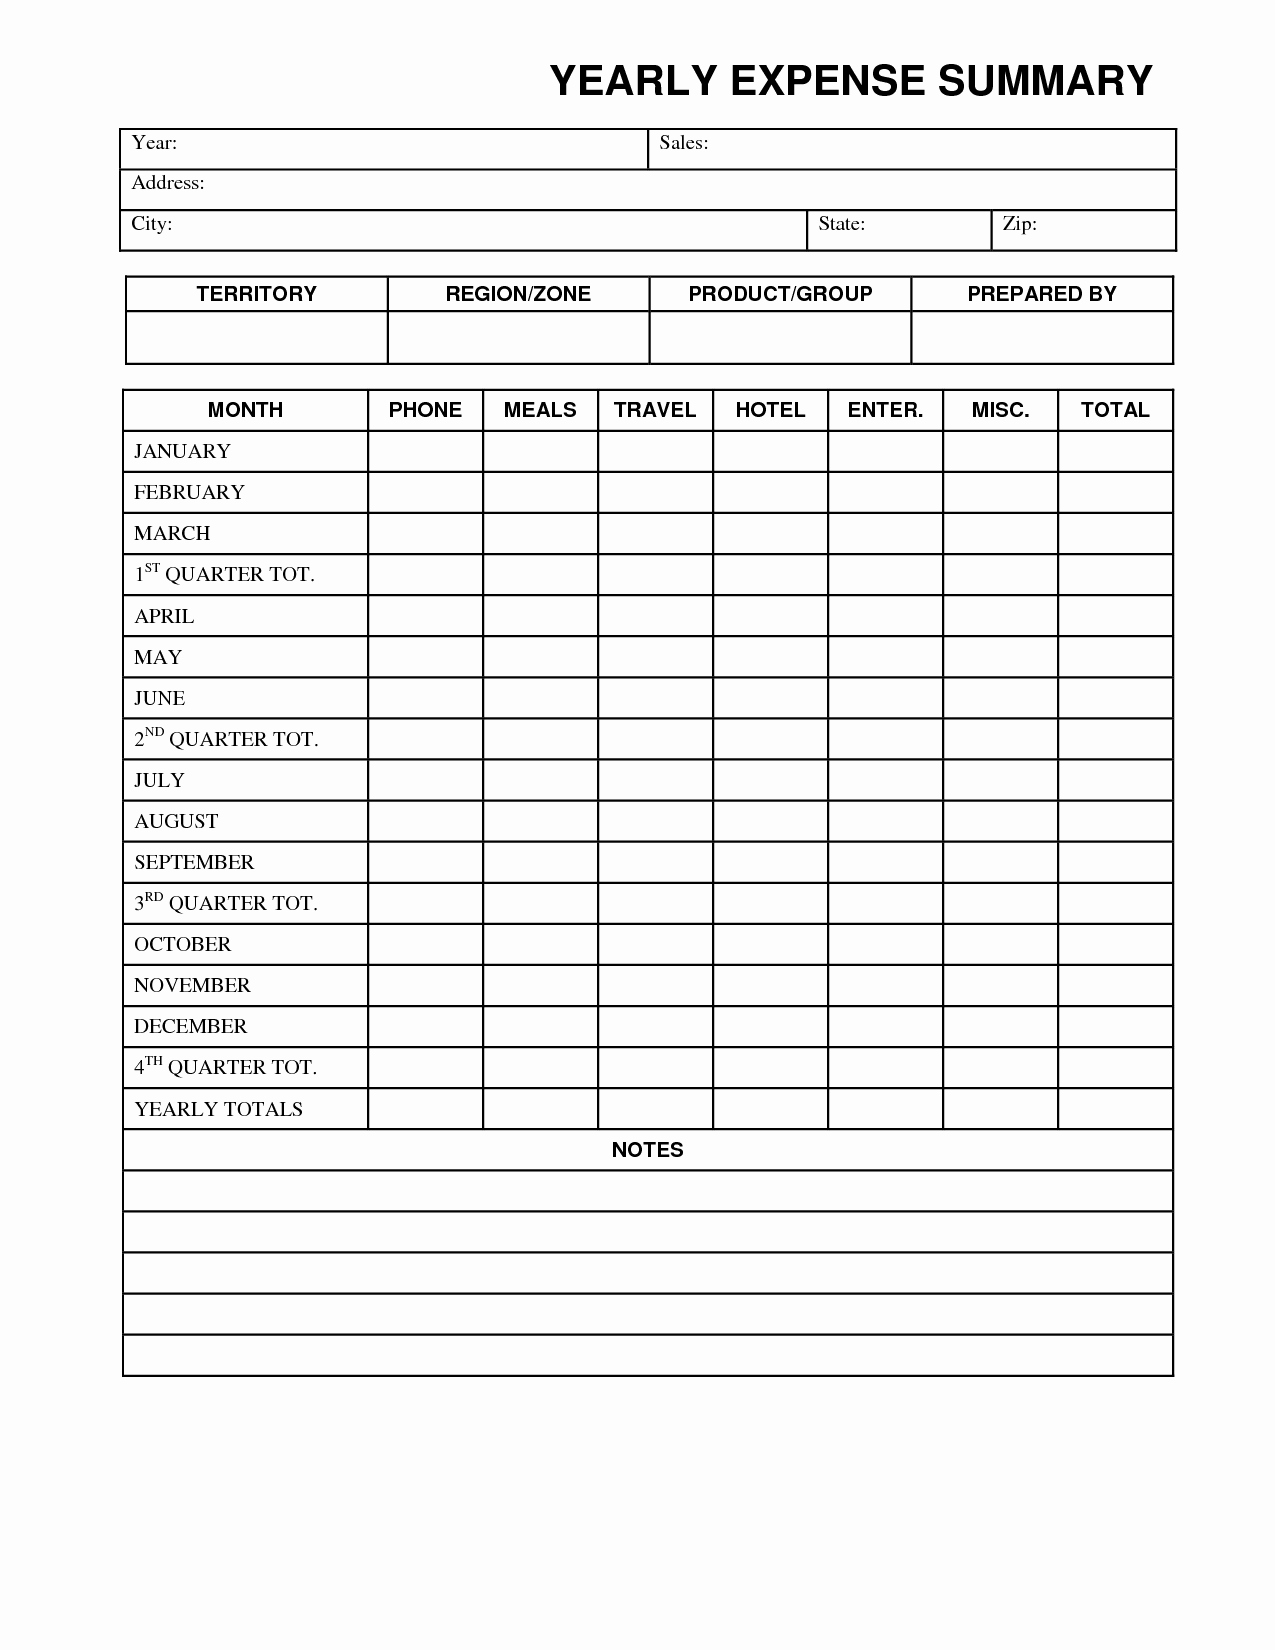 Business Expense Report Template Unique Blank Annual Yearly Business Expense Report Template